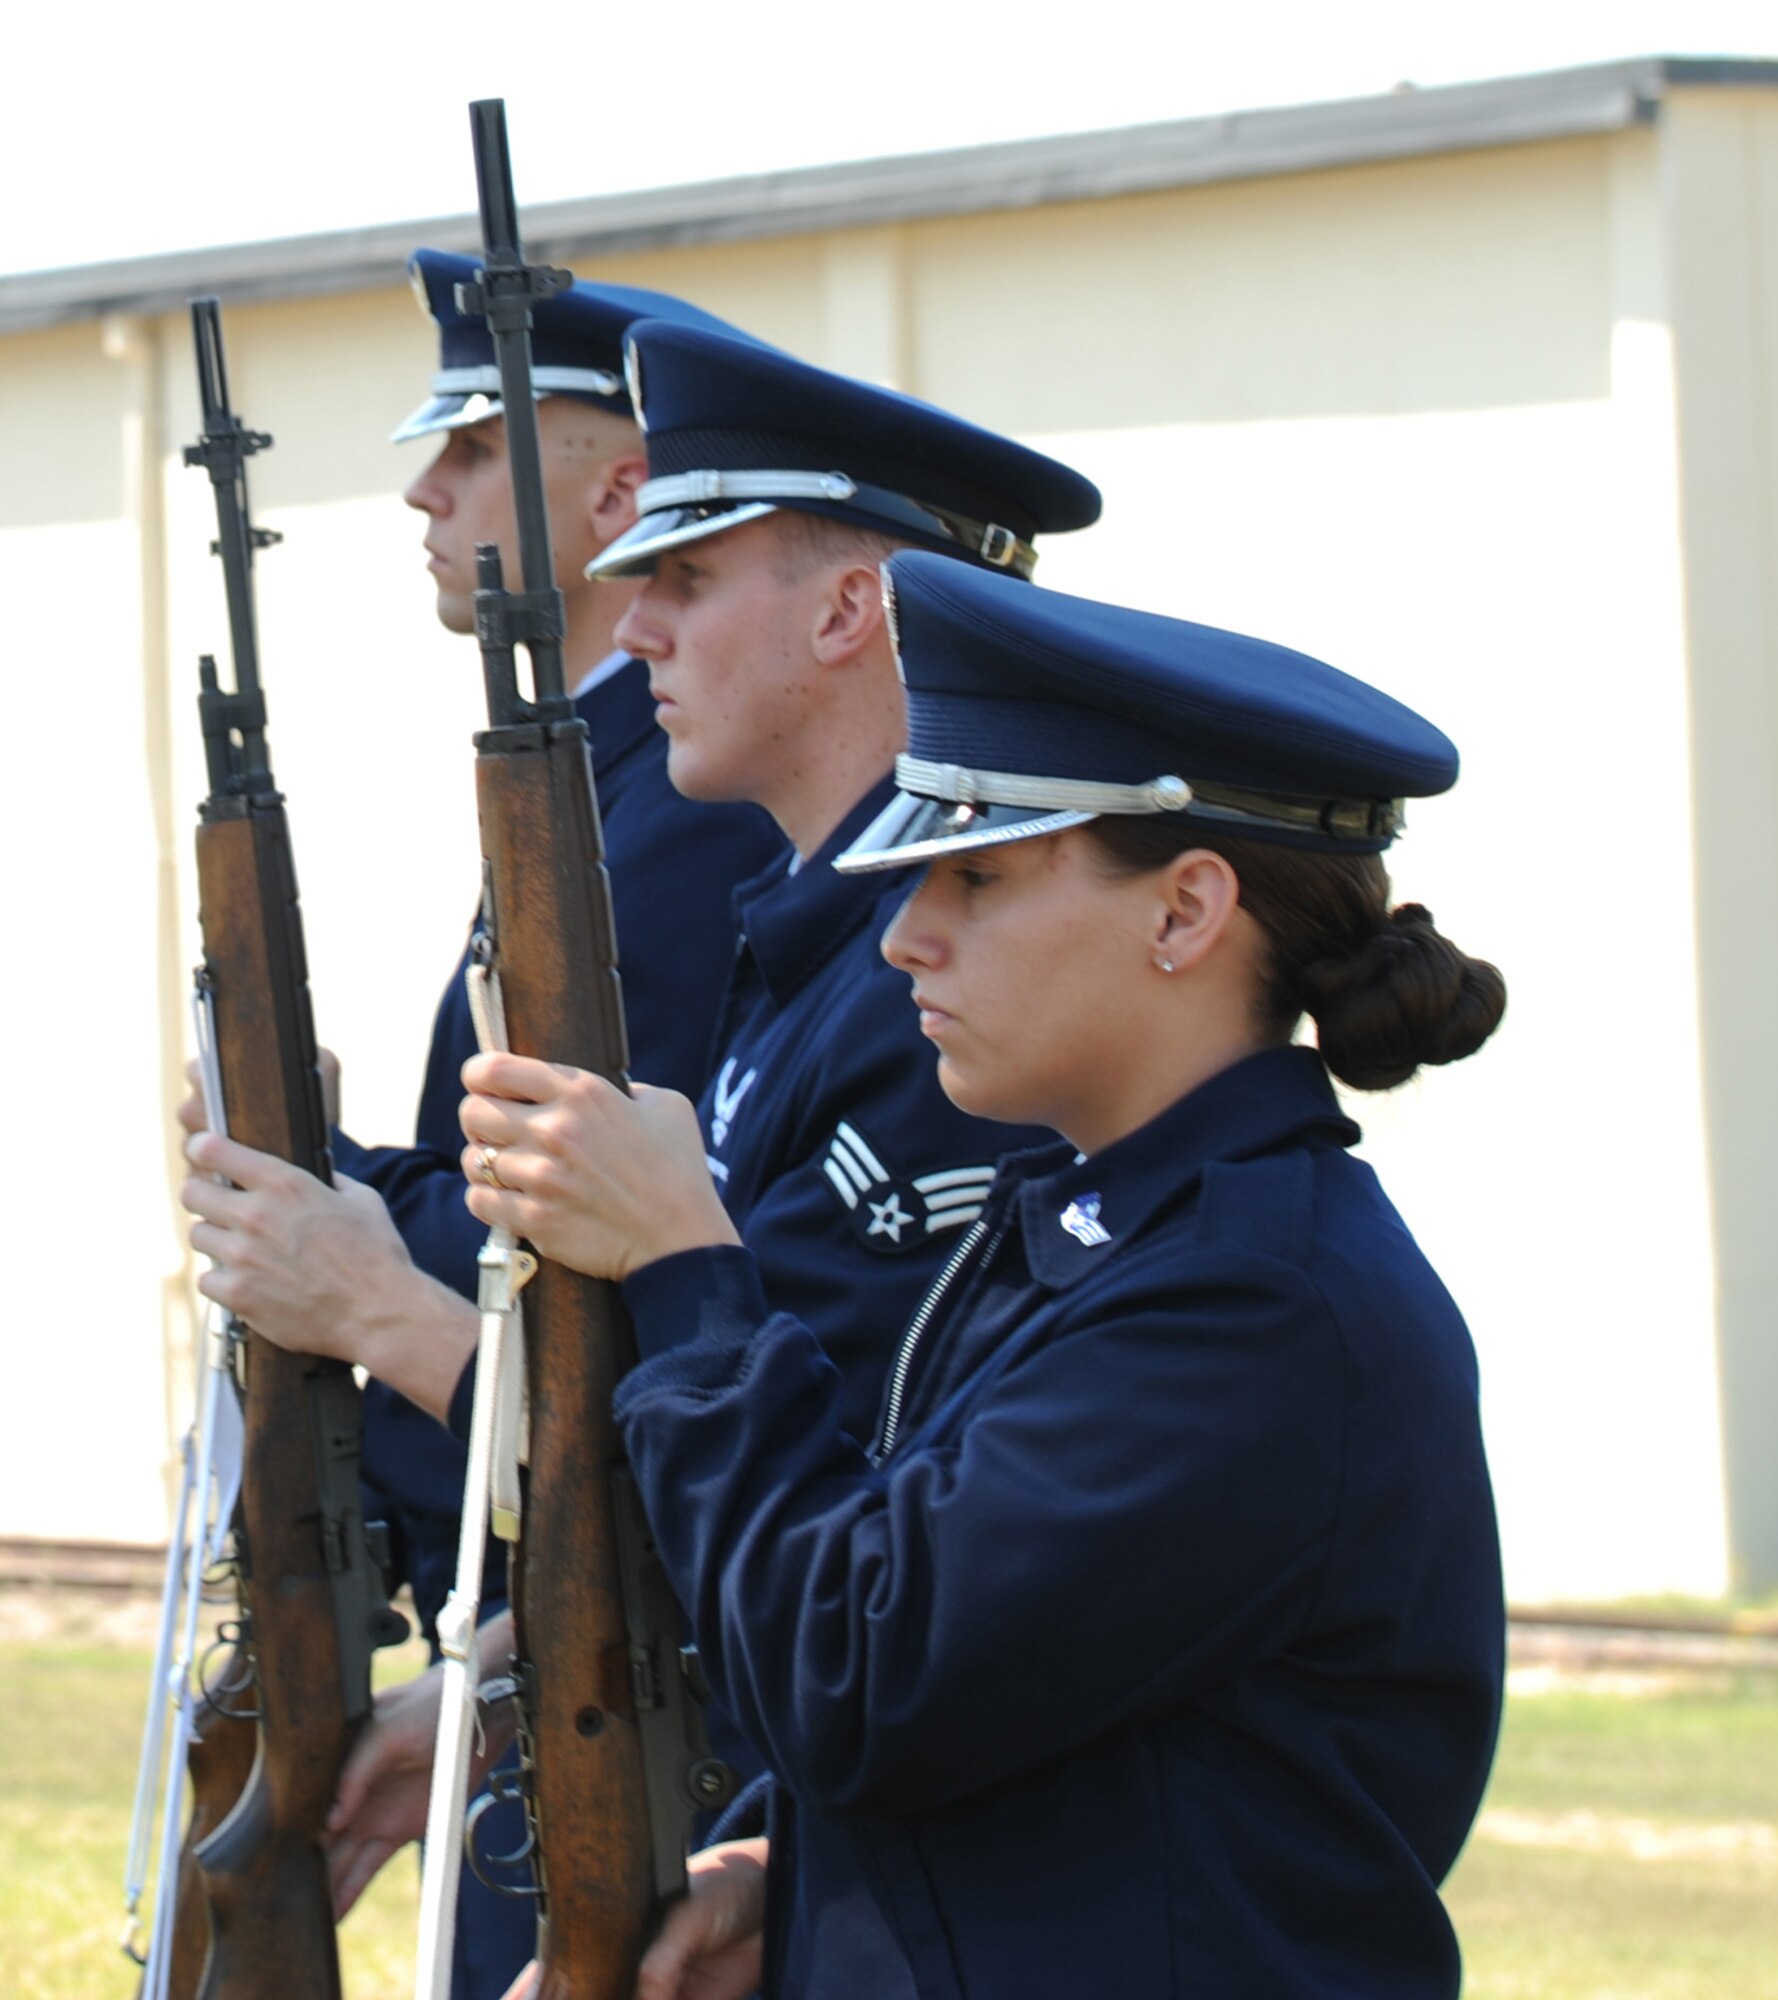 SEYMOUR JOHNSON AIR FORCE BASE, N.C.- Airman 1st Class Jason Hochsprung, Senior Airman Tiffany Legree, and Senior Airman Hoston Kirkeide, members of the firing party, stand at attention to render respect during "Taps" on June 24. Proper military bearing is a vital part of the base honor guard mission. (U.S. Air Force photo by Airman 1st Class Whitney Stanfield)